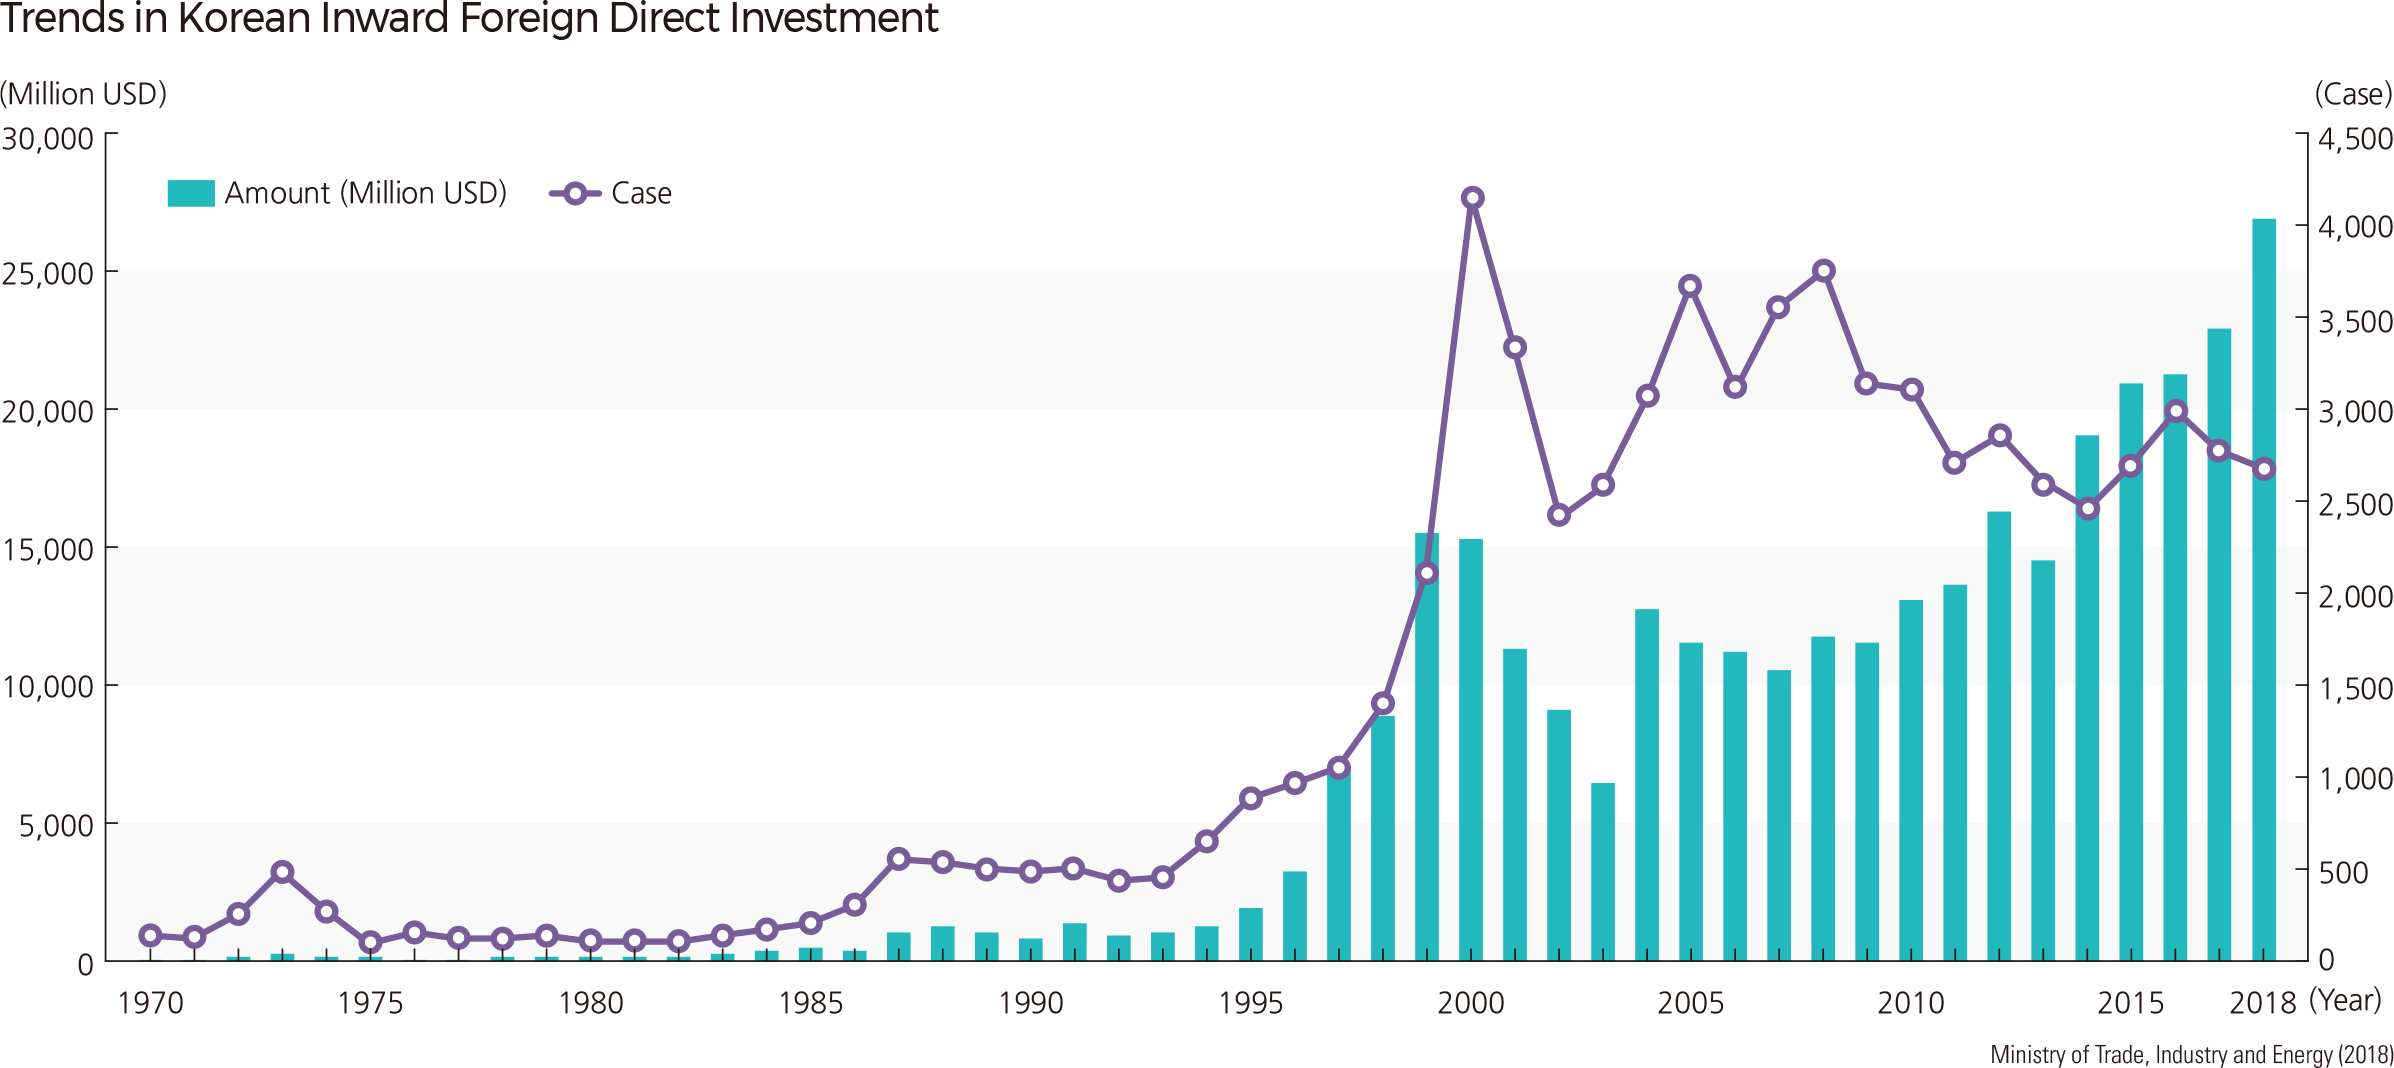 Trends in Korean Inward Foreign Direct Investment